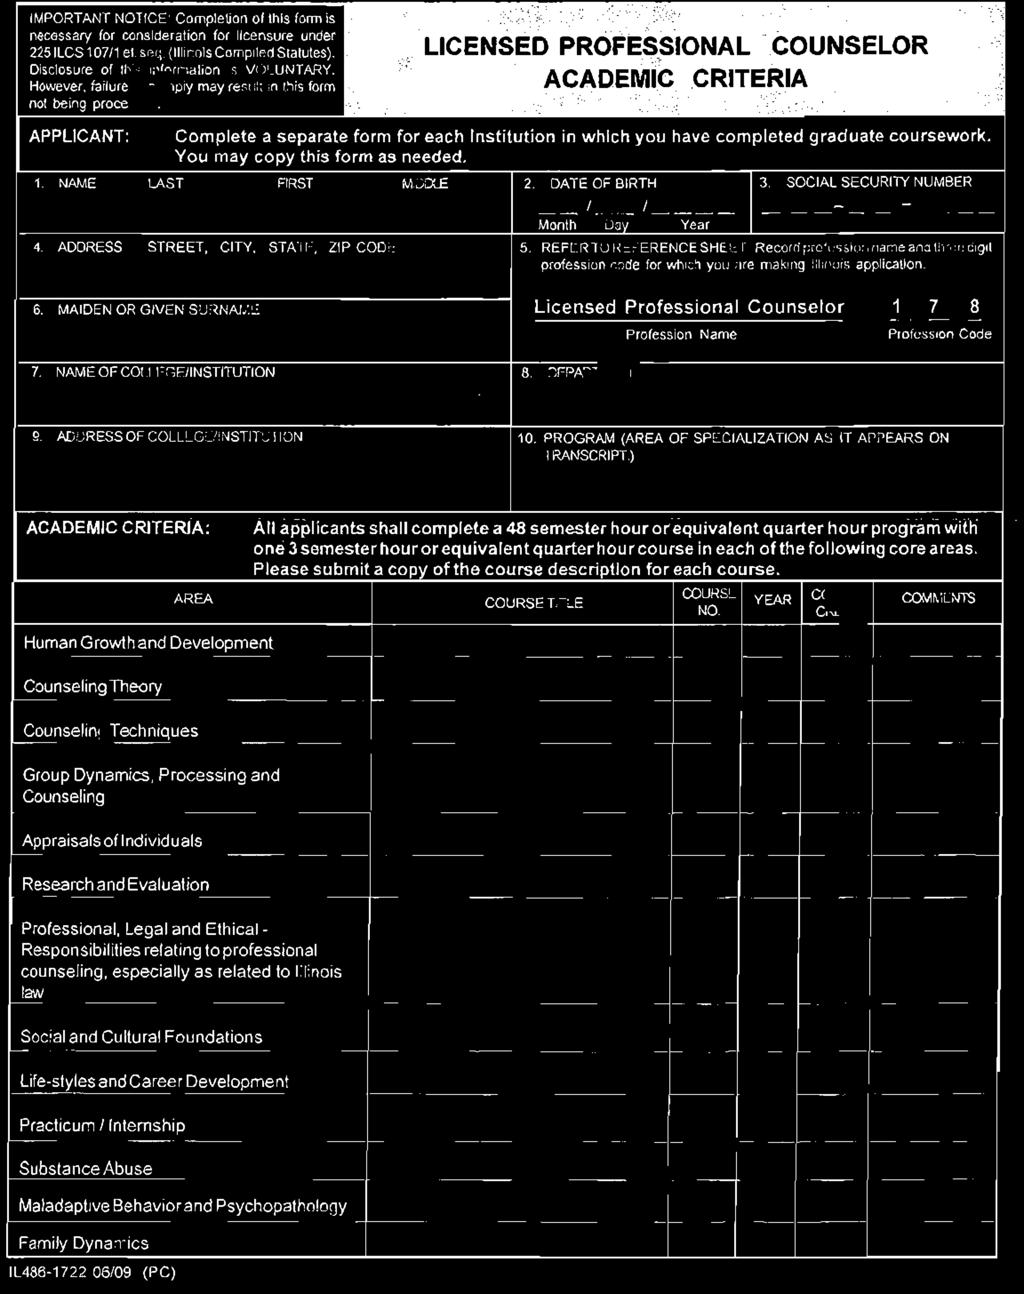 IMPORTANT NOTICE: Completion of this form is necessary for consideration for licensure under 2251LCS 10711 et. seq. (Illinois Compiled Statutes). Disclosure of this information is VOLUNTARY.